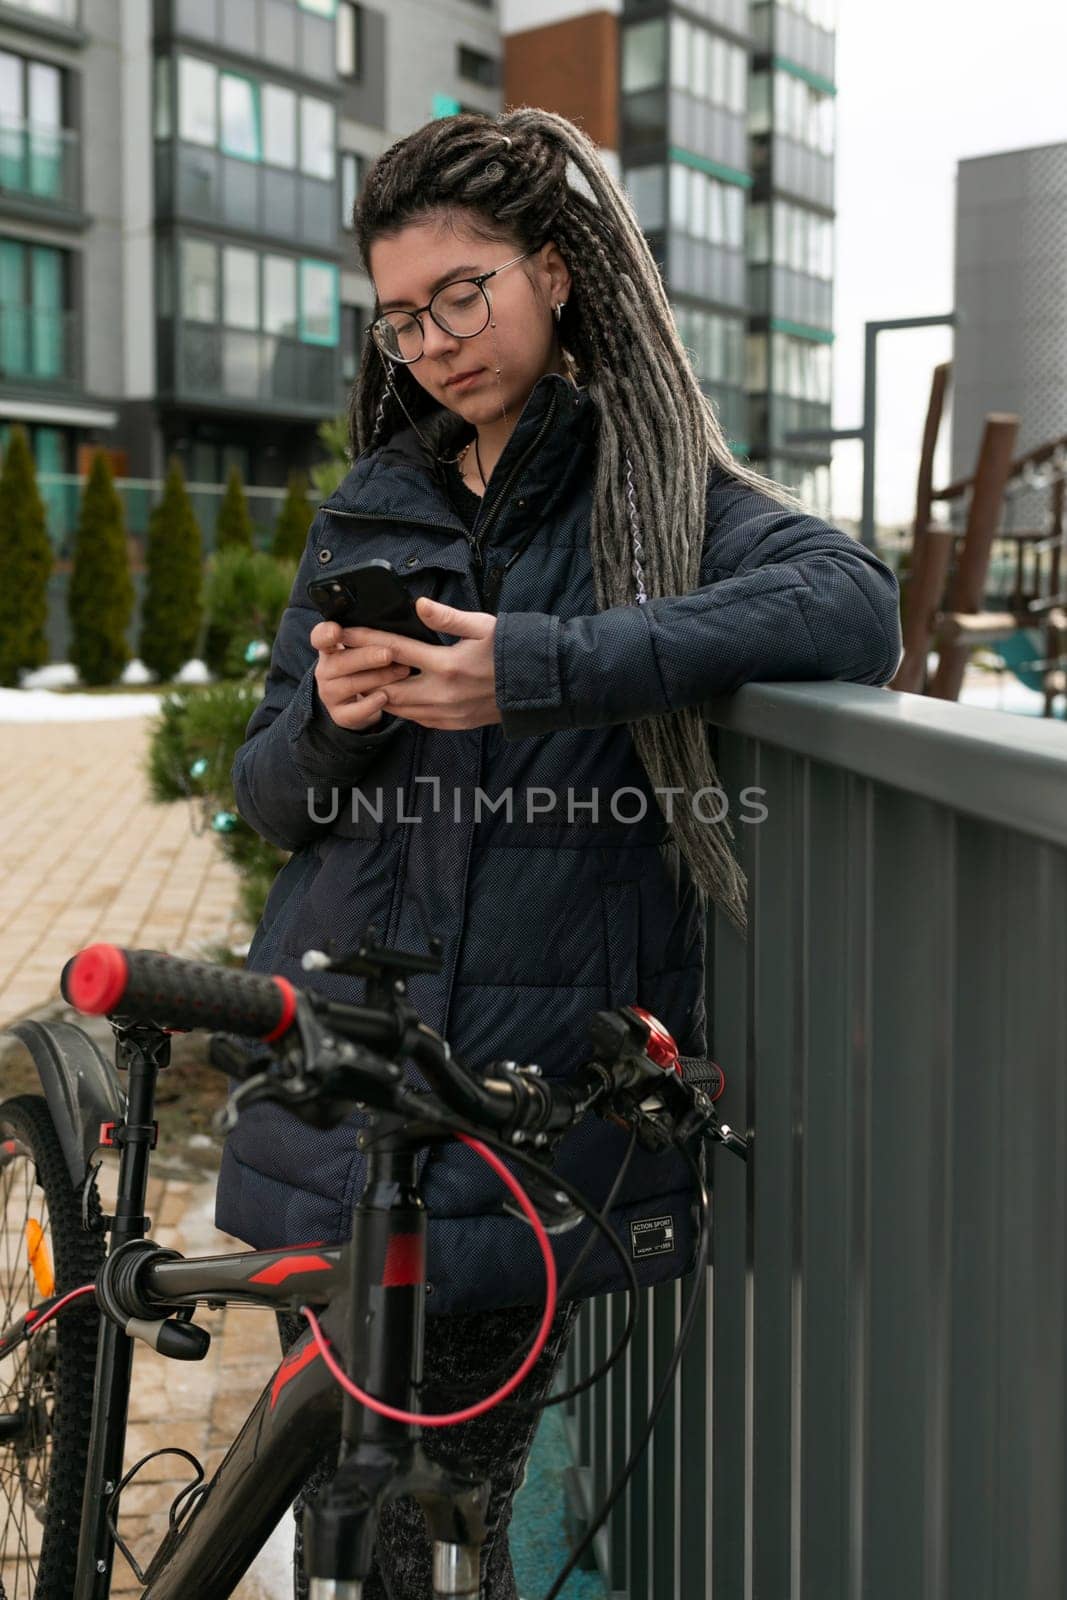 A pretty young woman with a dreadlocked hairstyle rides a bicycle and stops to rest.